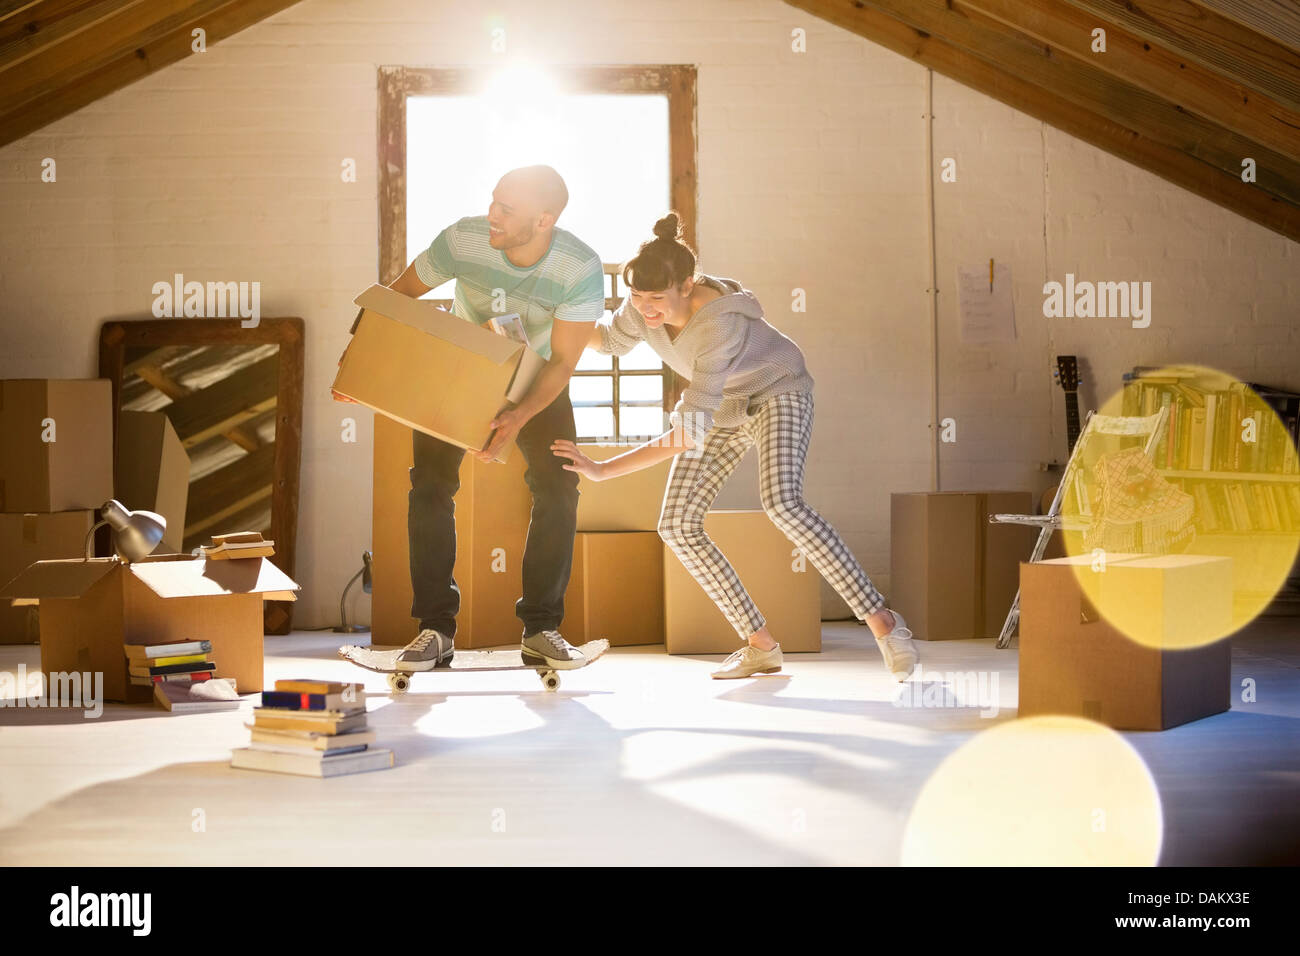 Couple unpacking boxes in attic Stock Photo